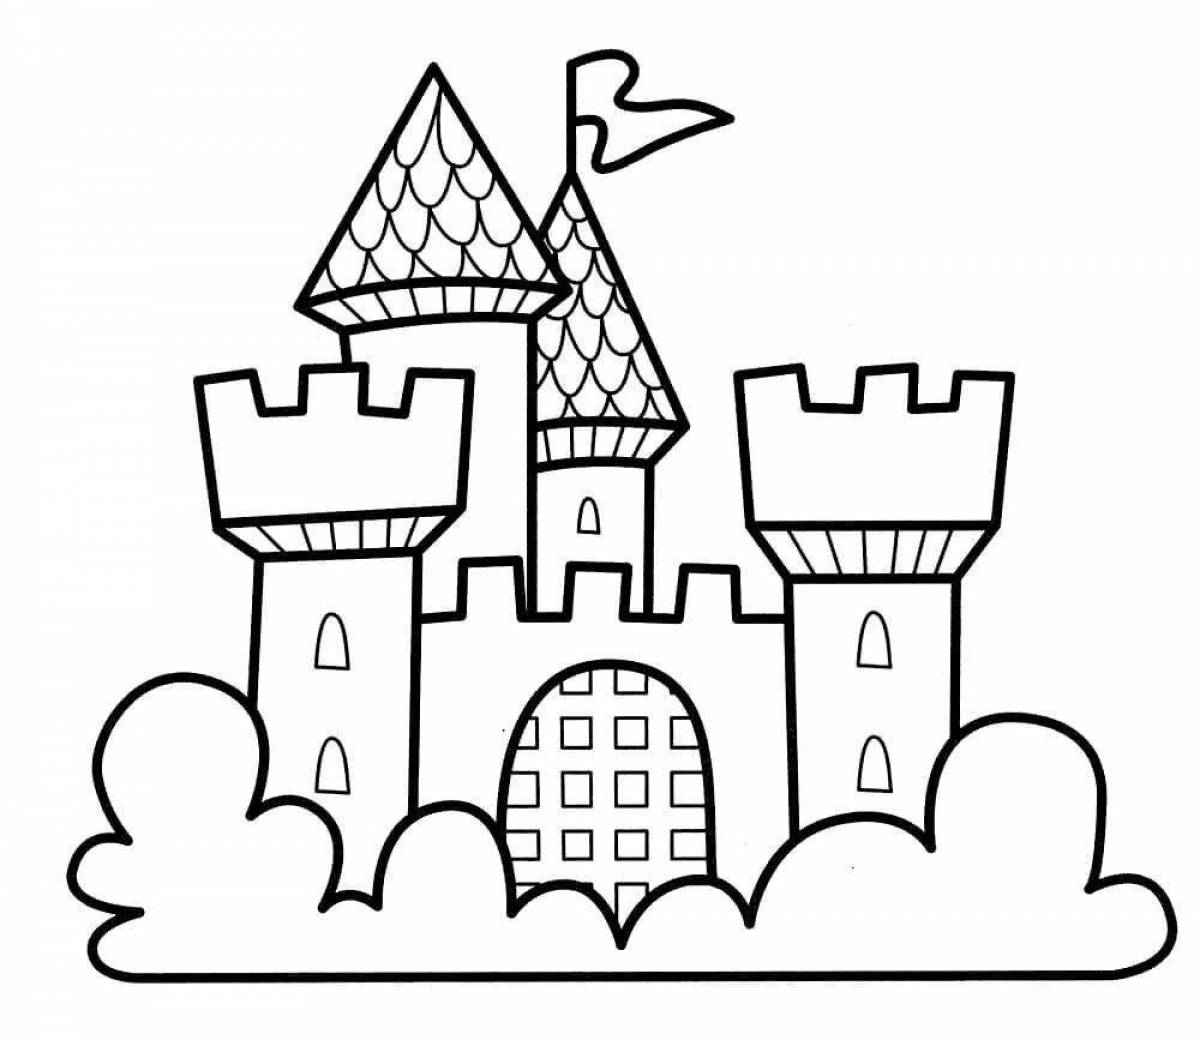 Majestic castle coloring book for 4-5 year olds